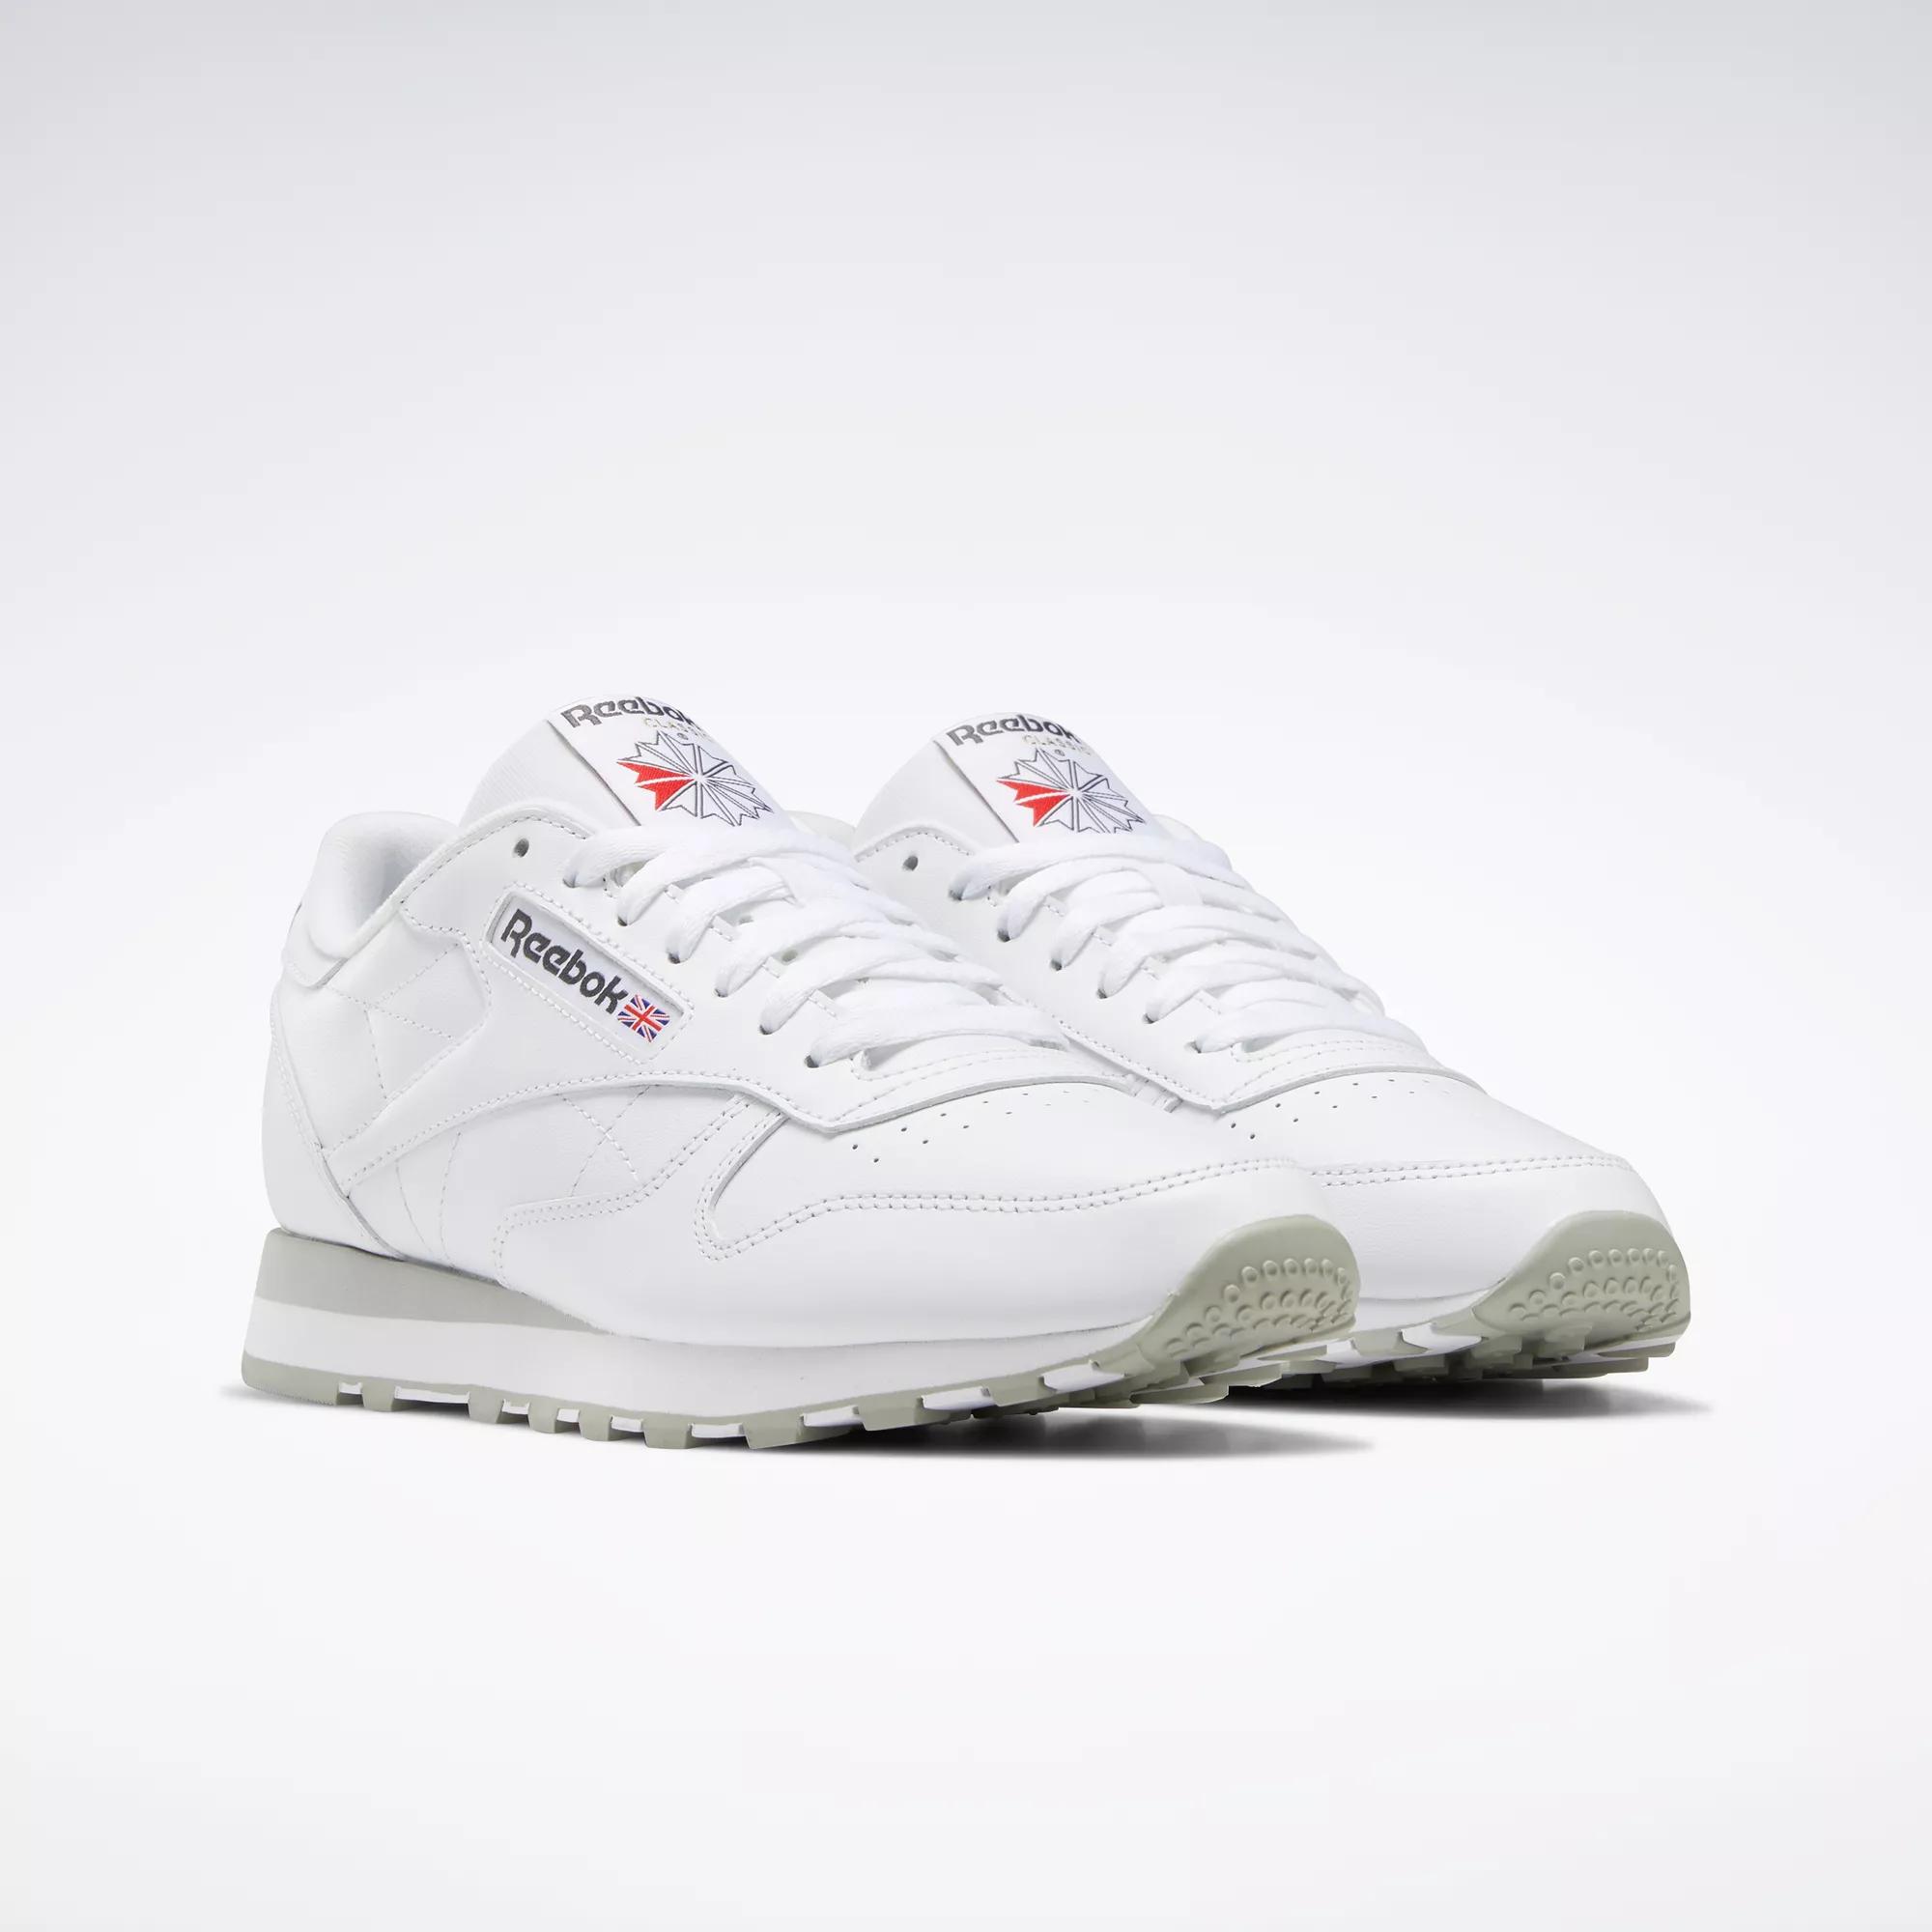 Mediate pave manuskript Classic Leather Shoes - Ftwr White / Pure Grey 3 / Pure Grey 7 | Reebok